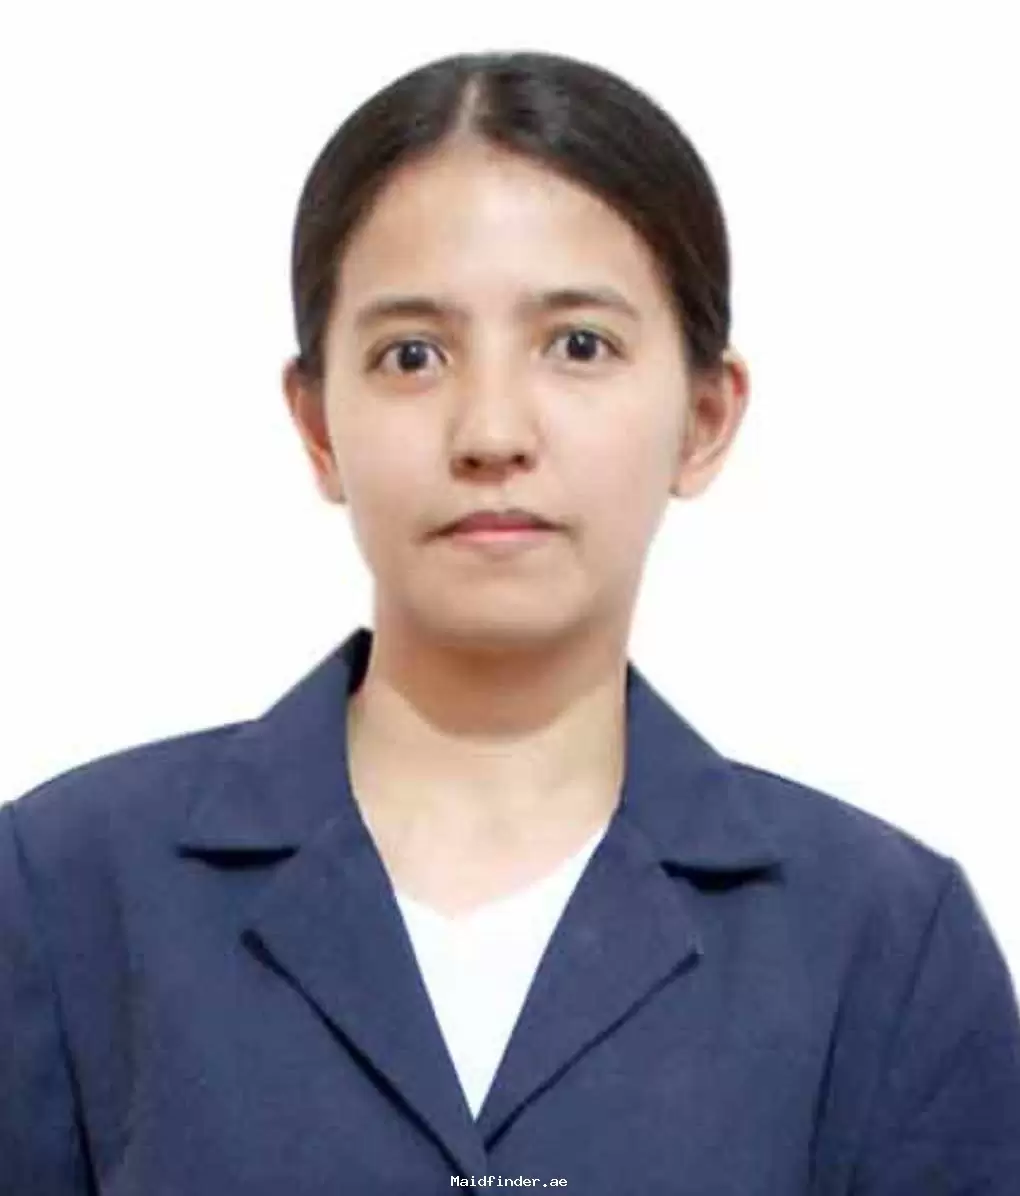 Maid Profile Picture 434253833_799269258788895_2733726881946187652_n.webp /home3/xgcwidmy/public_html/maid/